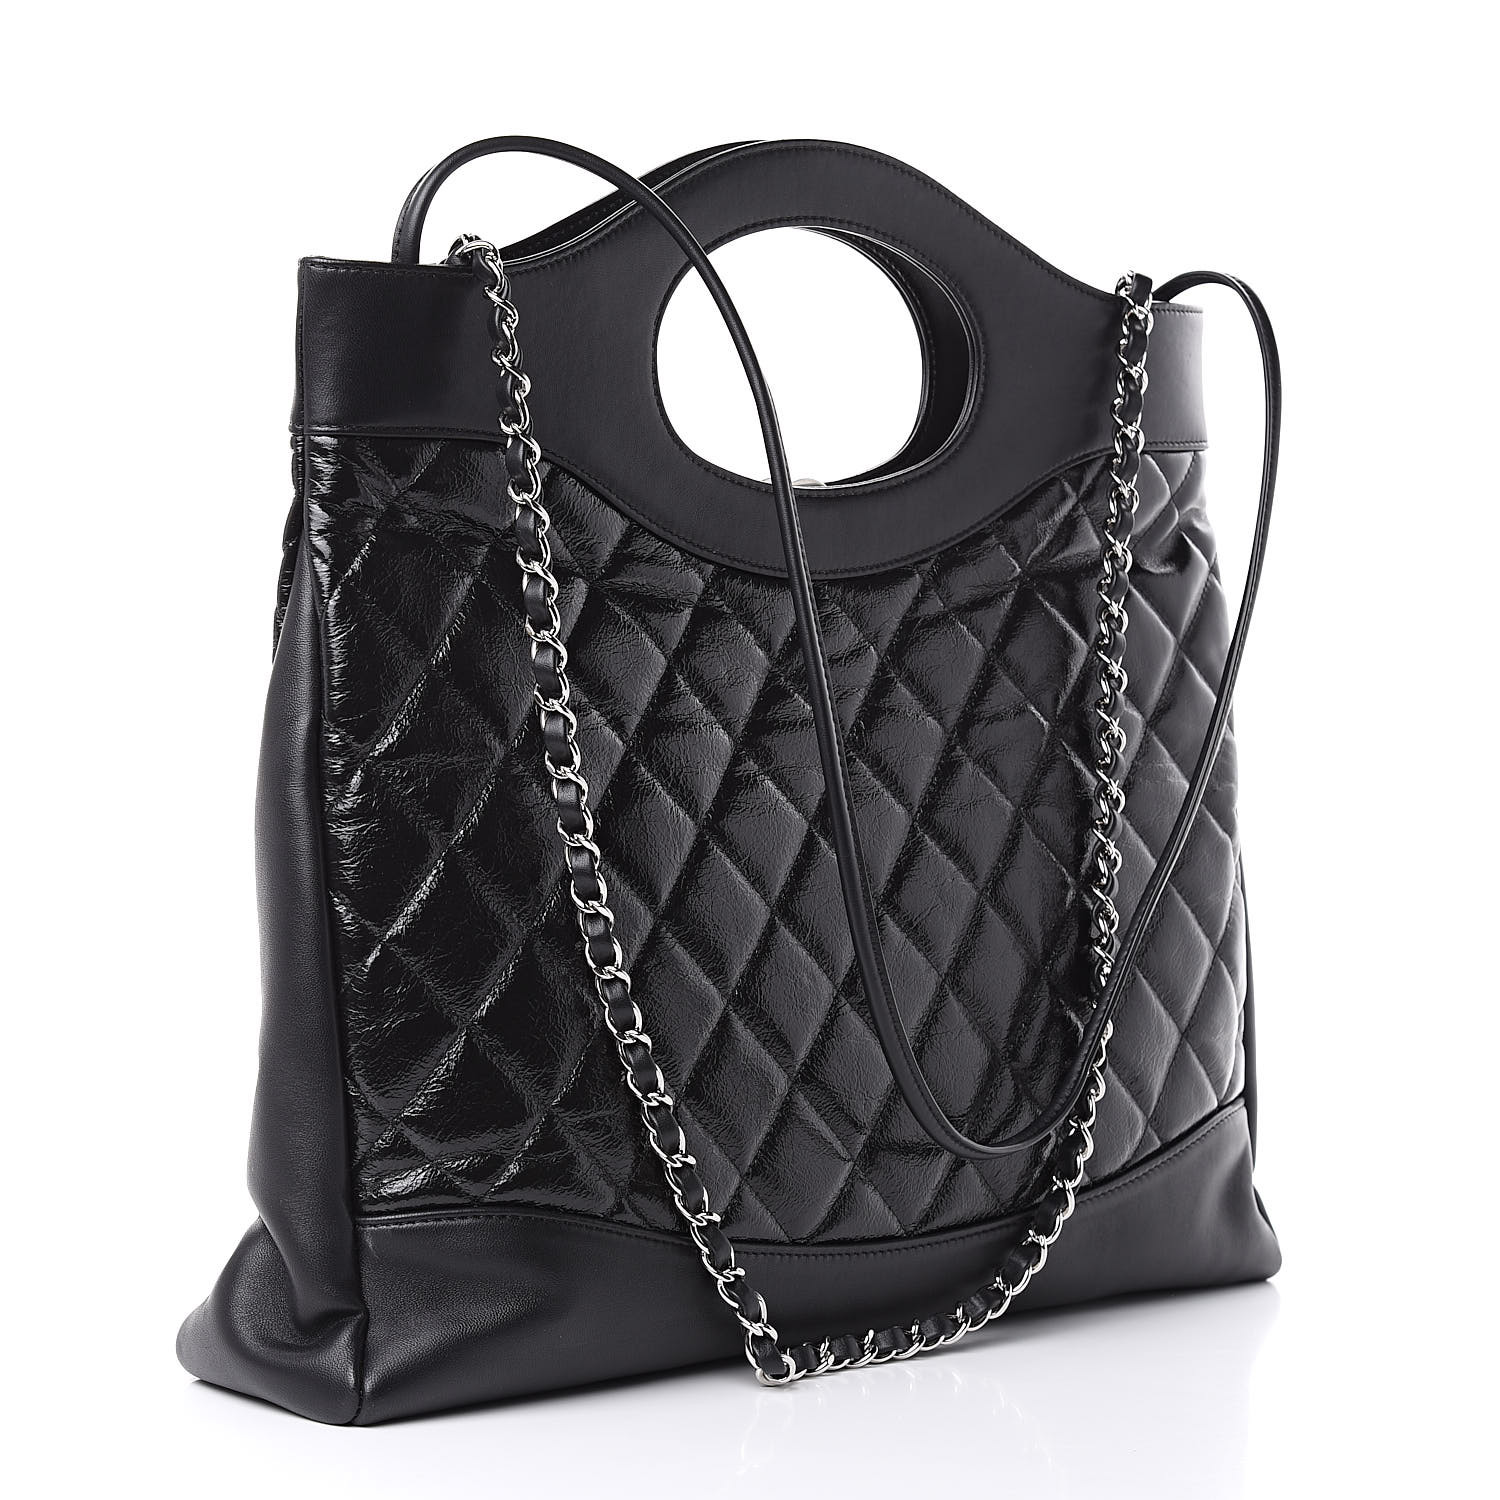 CHANEL Aged Calfskin Quilted Large 31 Shopping Bag Black 504145